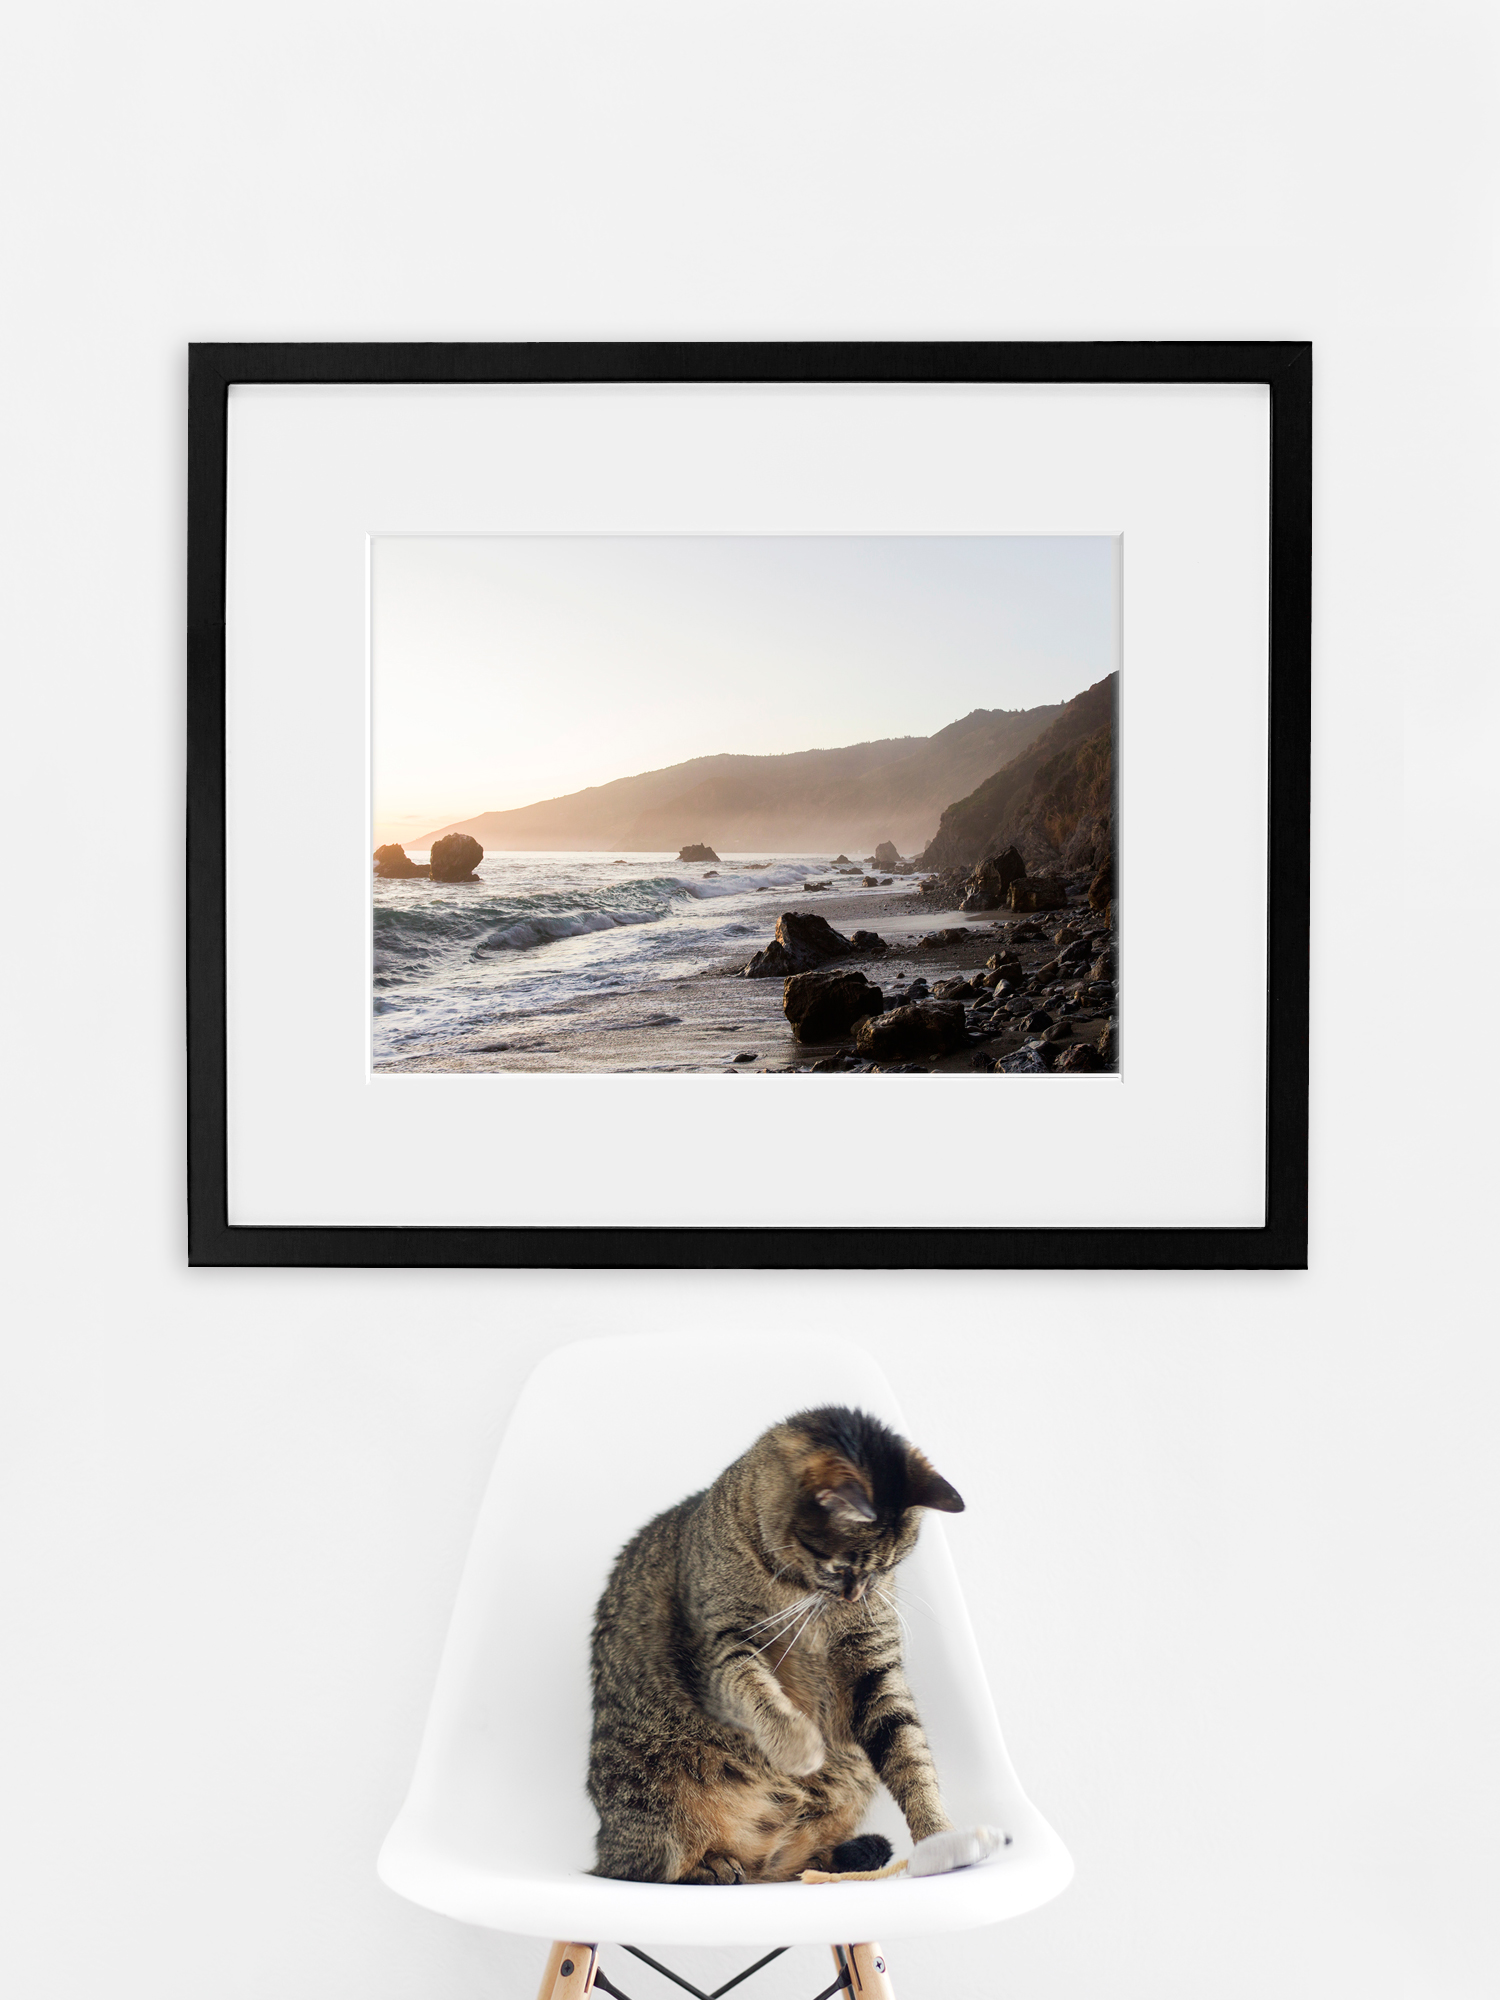 Mists in Big Sur — Available as a Print or Framed in White or Black Wood. Comes in frames 8x10 up to 30x40.